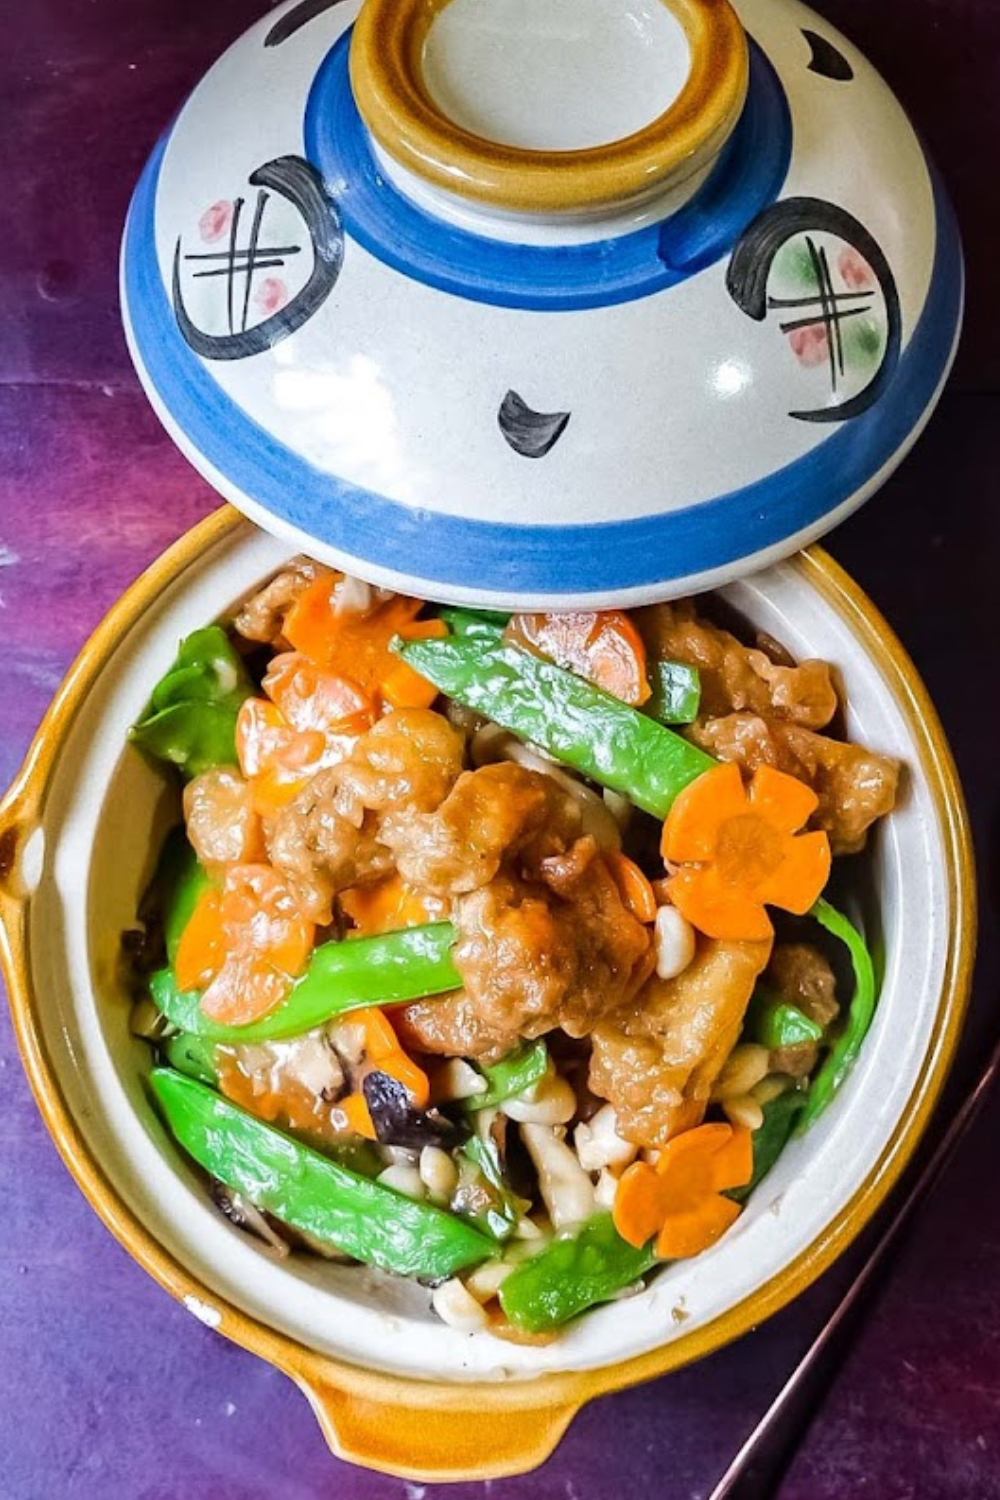 Crispy Sauteed chicken with Vegetables and Mushrooms1